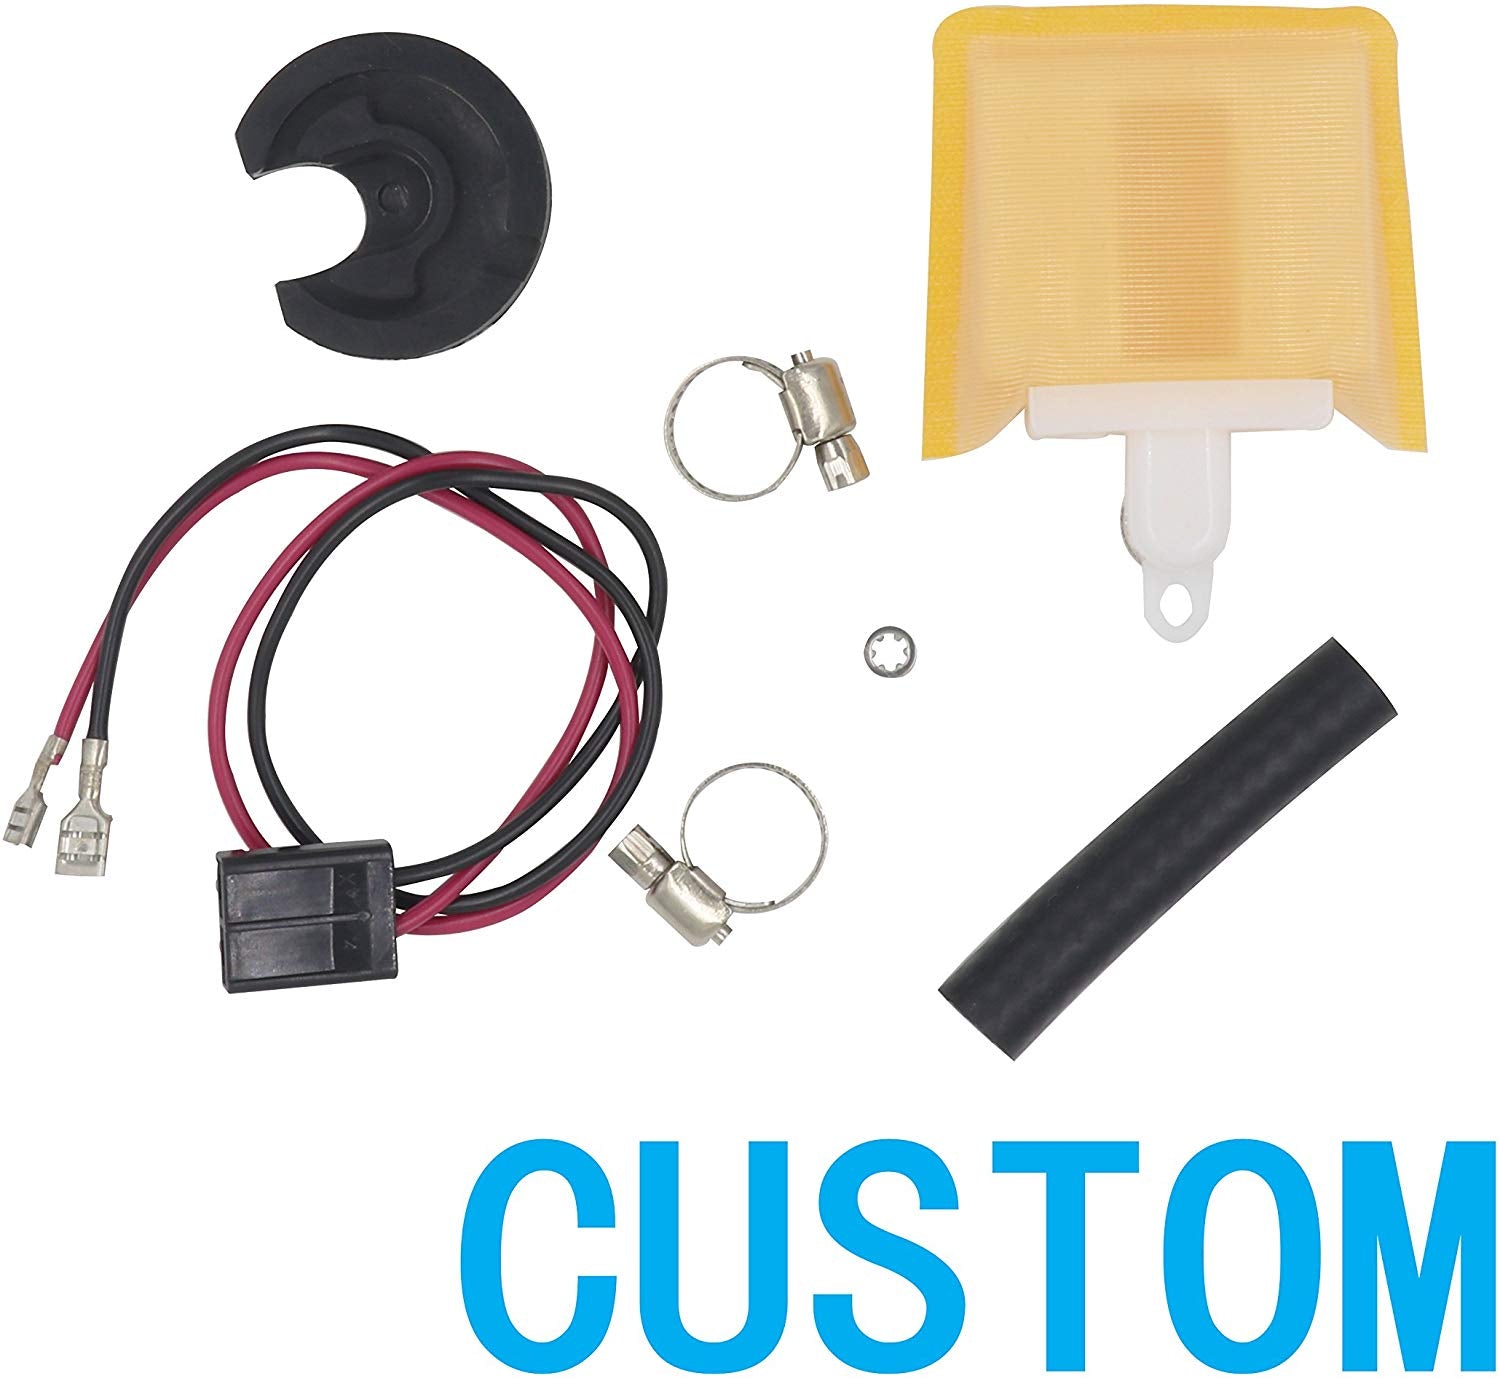 AUTOTOP Electric Fuel Pump Strainer & Connect Wire & Clamps & Gasket & Cover E7154